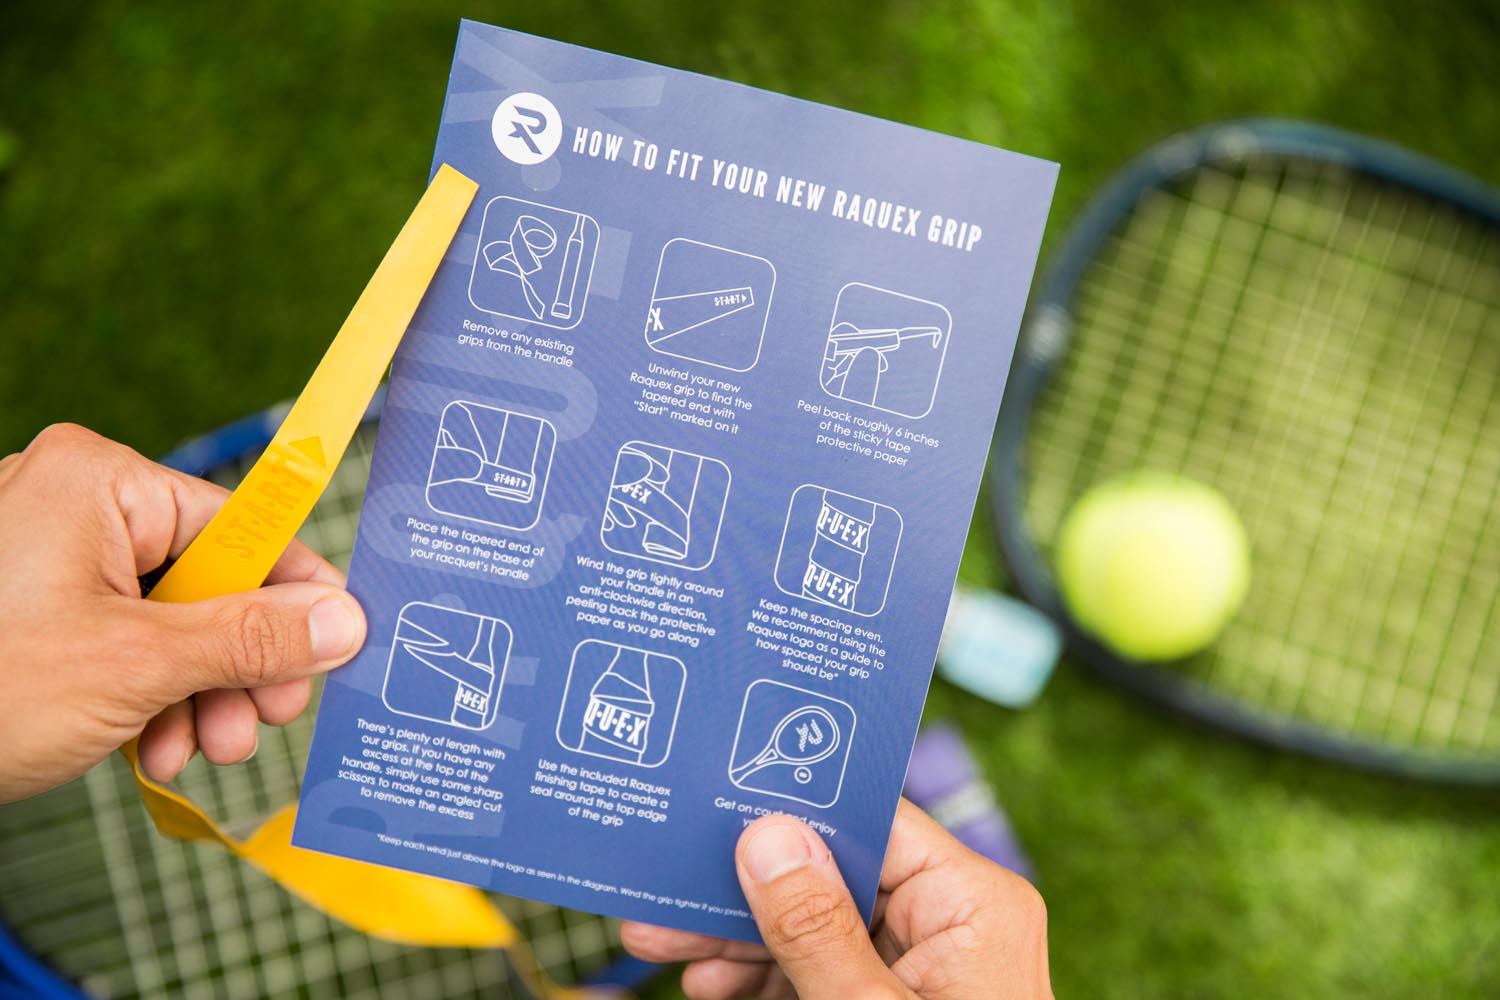 How to fit a racquet grip